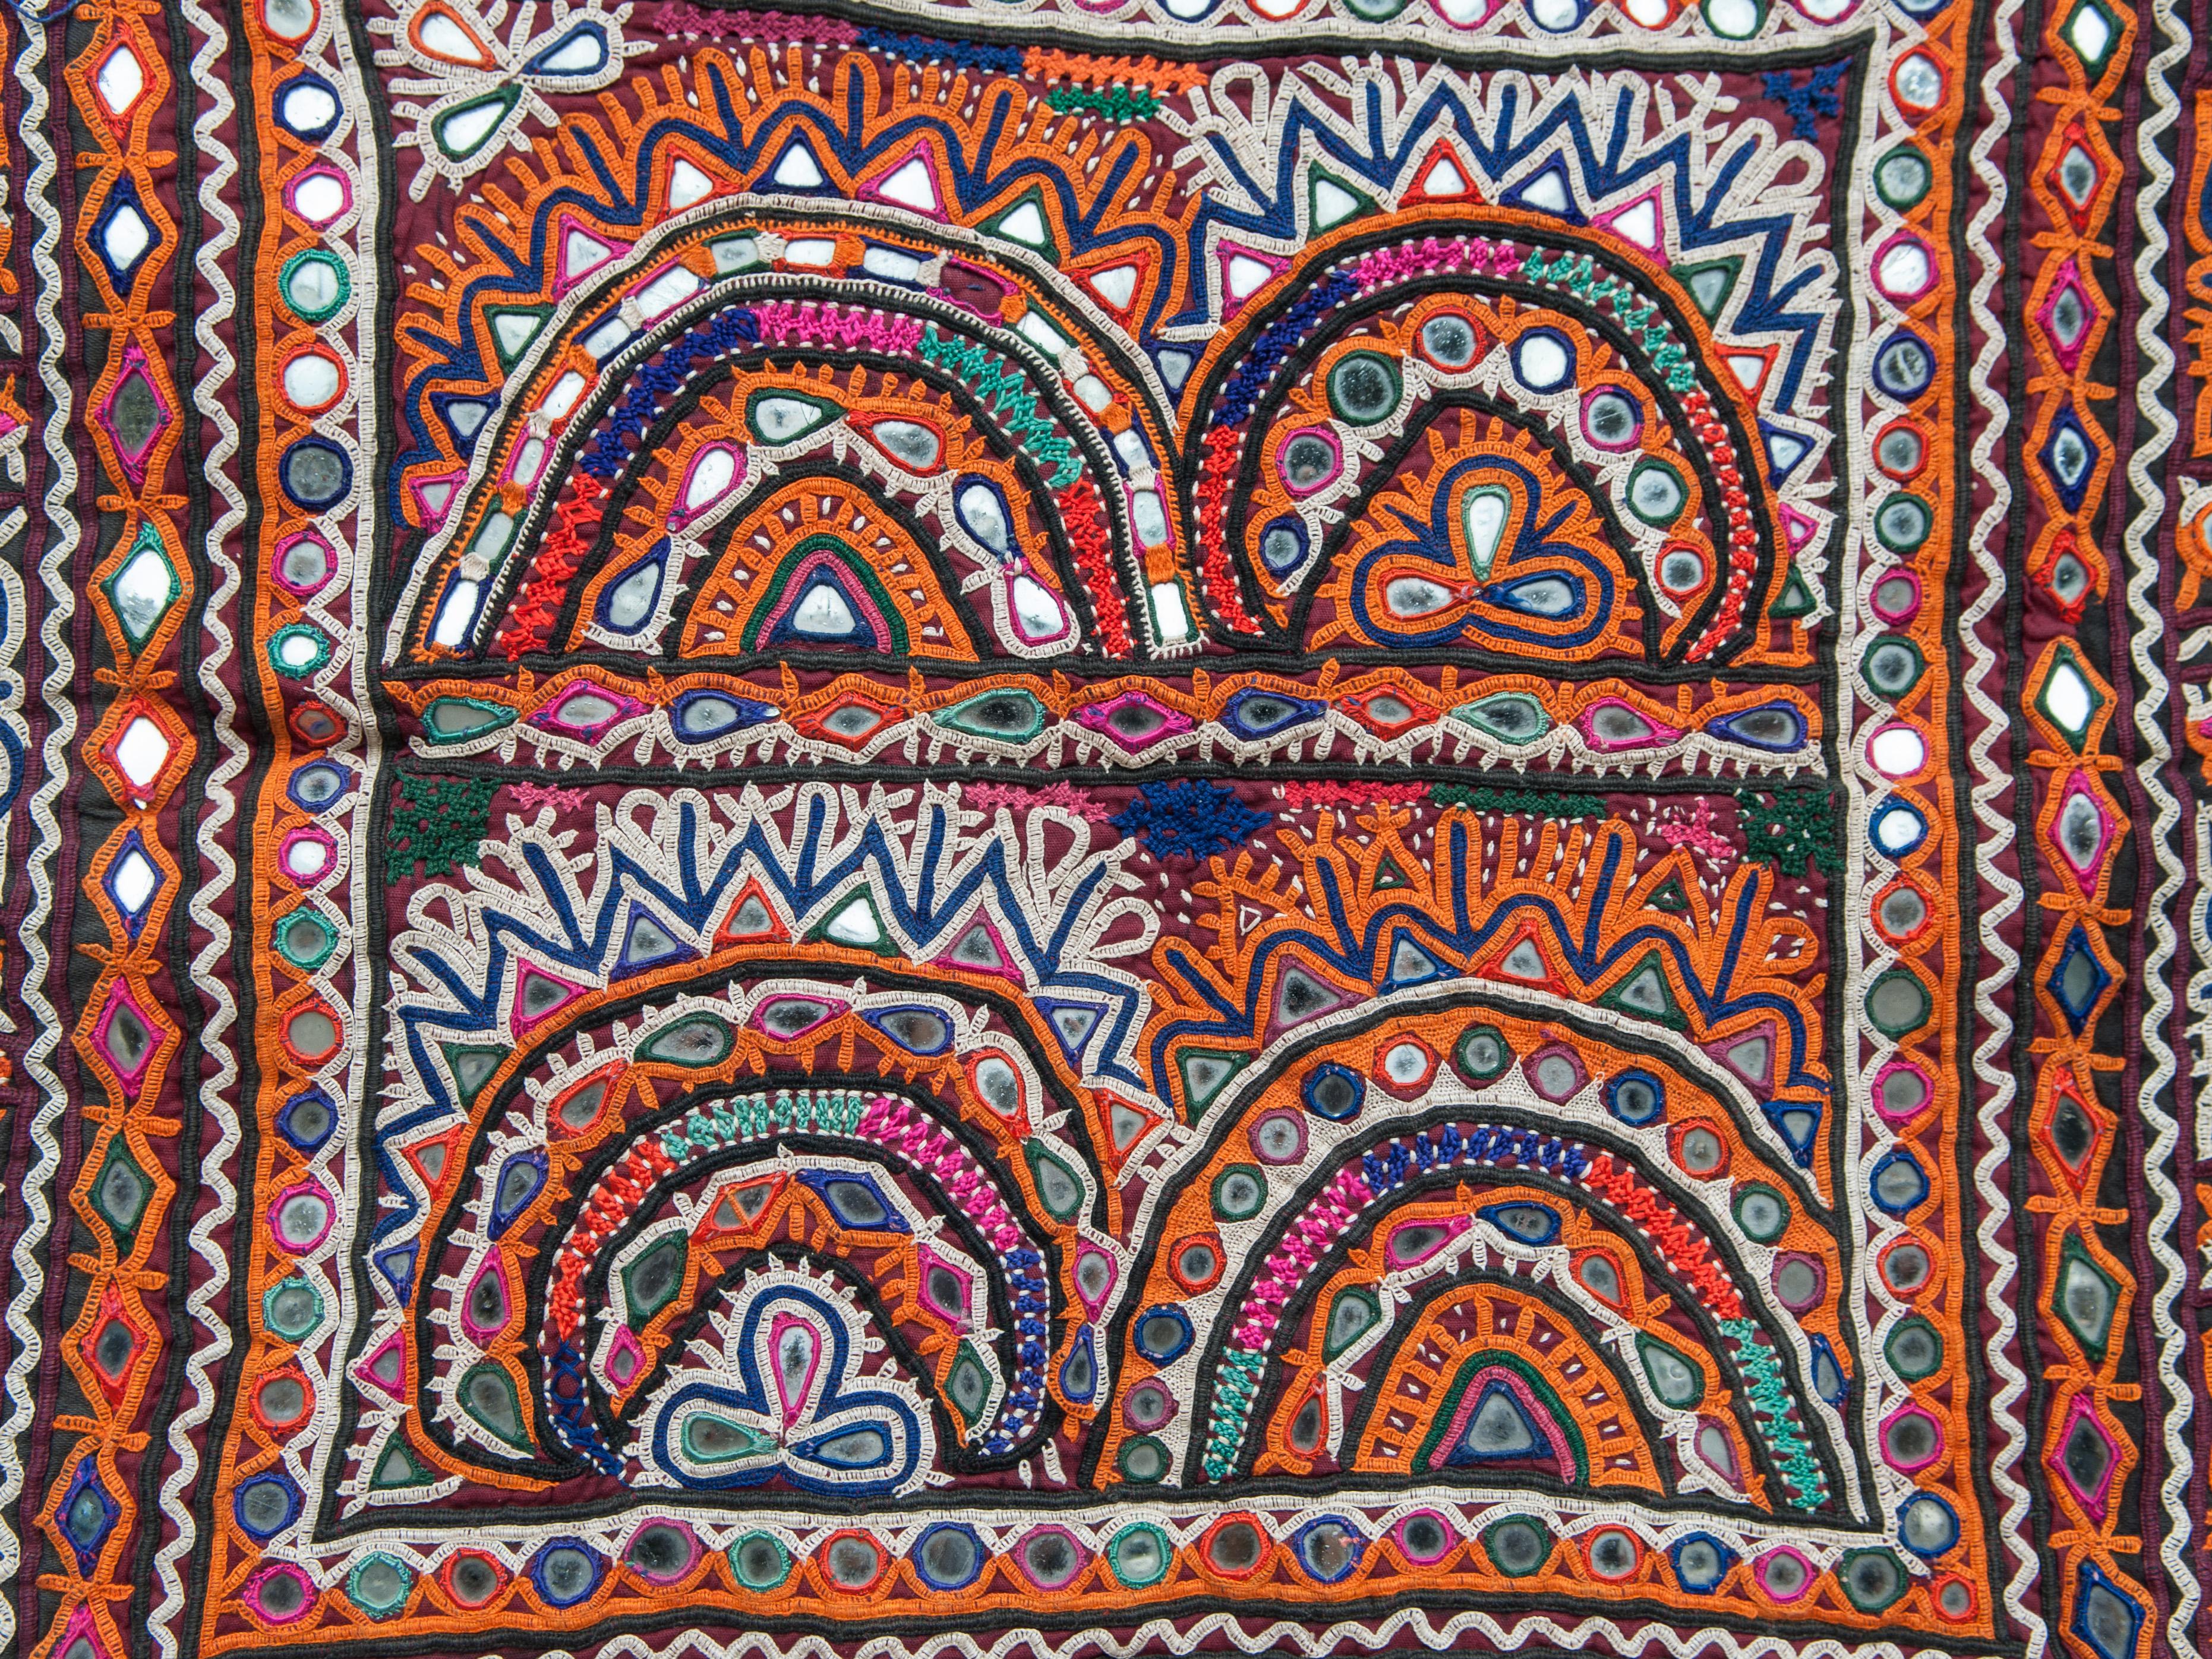 Vintage Chakla embroidered hanging, Rabari of Gujarat, India. Mid-20th century.
This finely worked hand embroidered textile comes from the Vaghadia Rabari, an ethnic group of pastoralists living in eastern Gujarat in India. It was used as a small